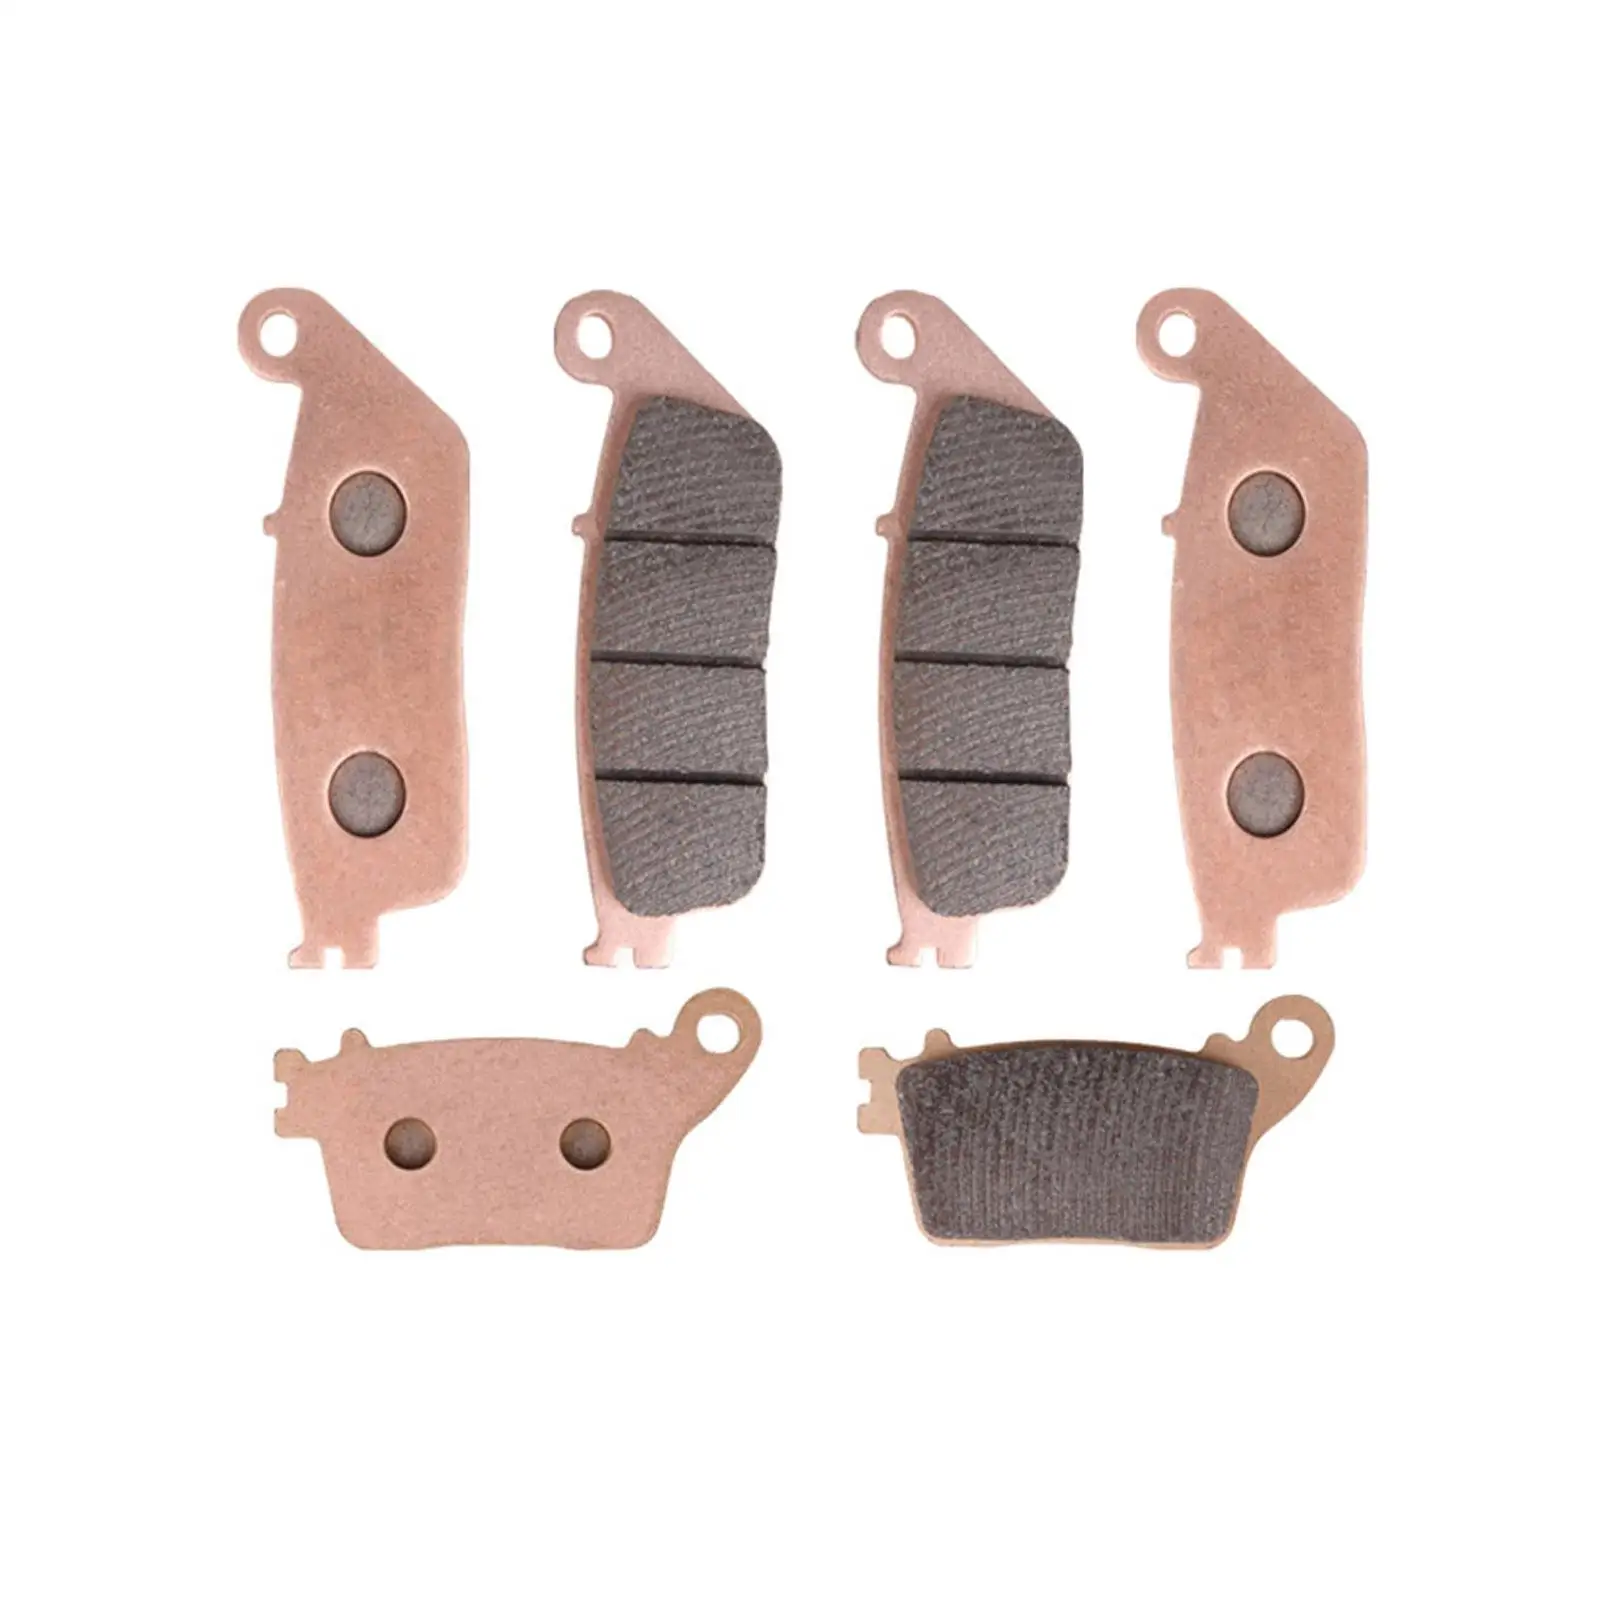 6 Pieces Front and Rear Brake Pads Set Brake Pads Set for Honda Hornet Easy to Install High Performance Repair Part